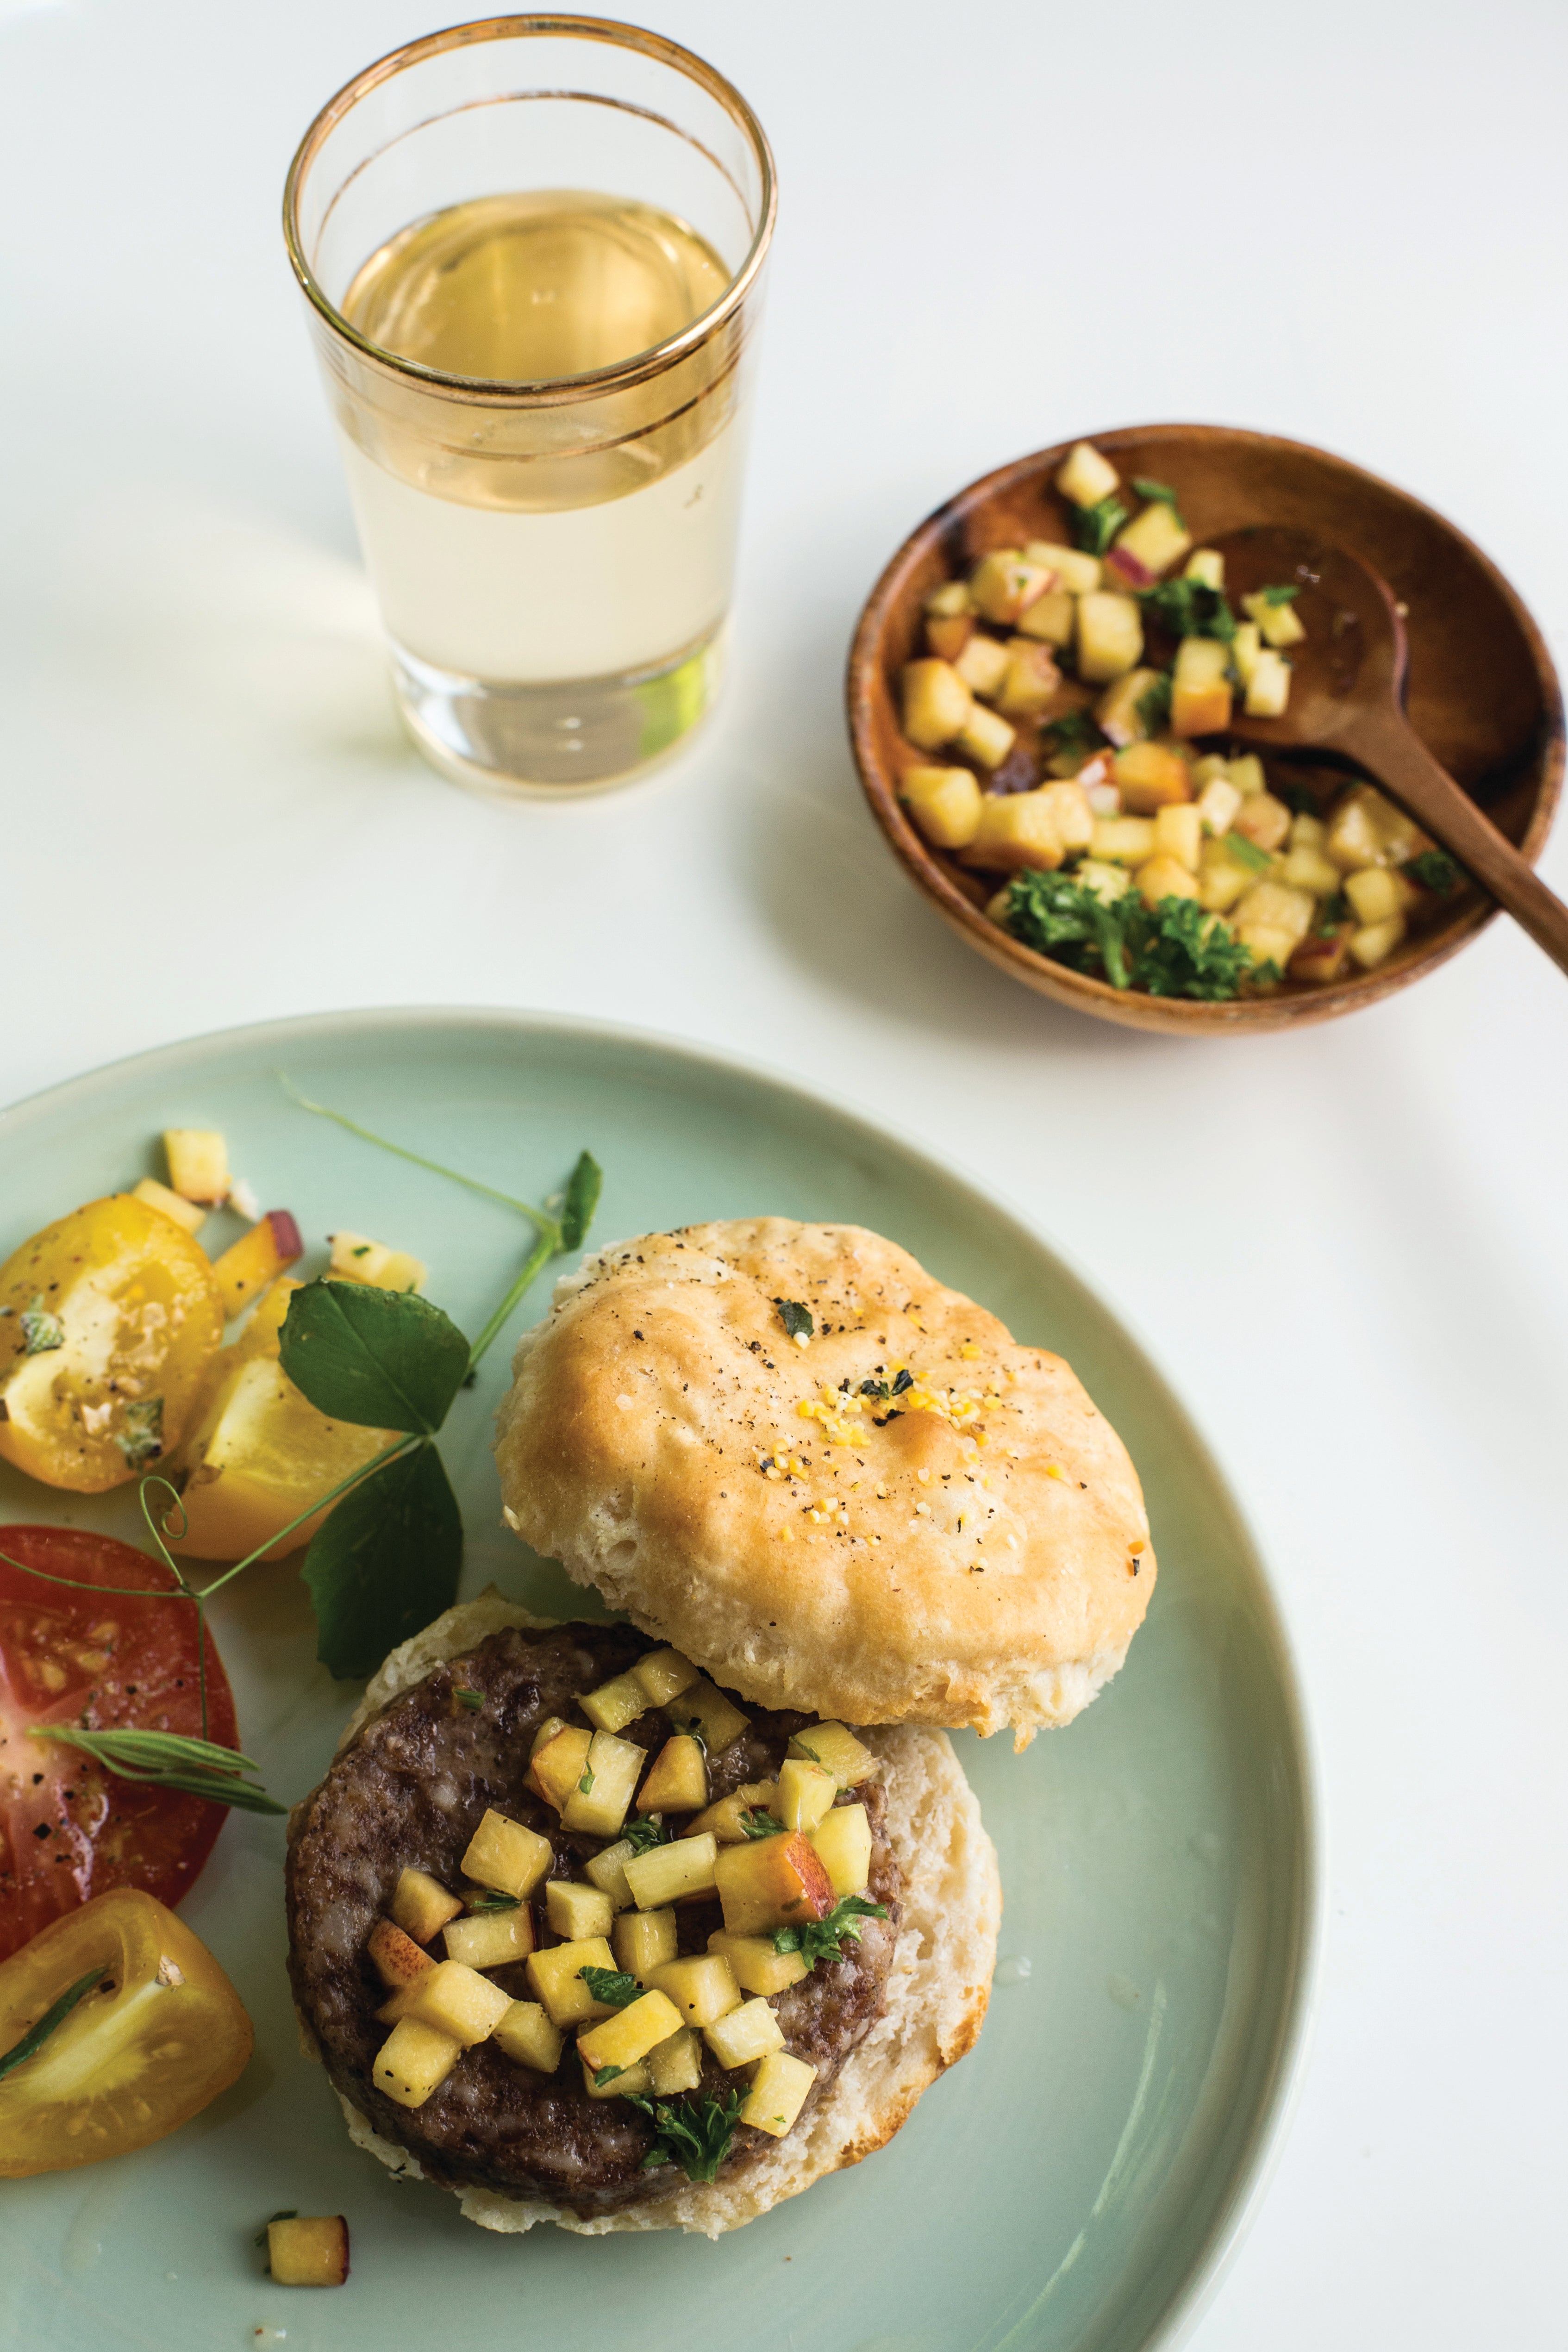 Recipe: Black Pepper Thyme Biscuits with Sausage and Ginger Peach Relish